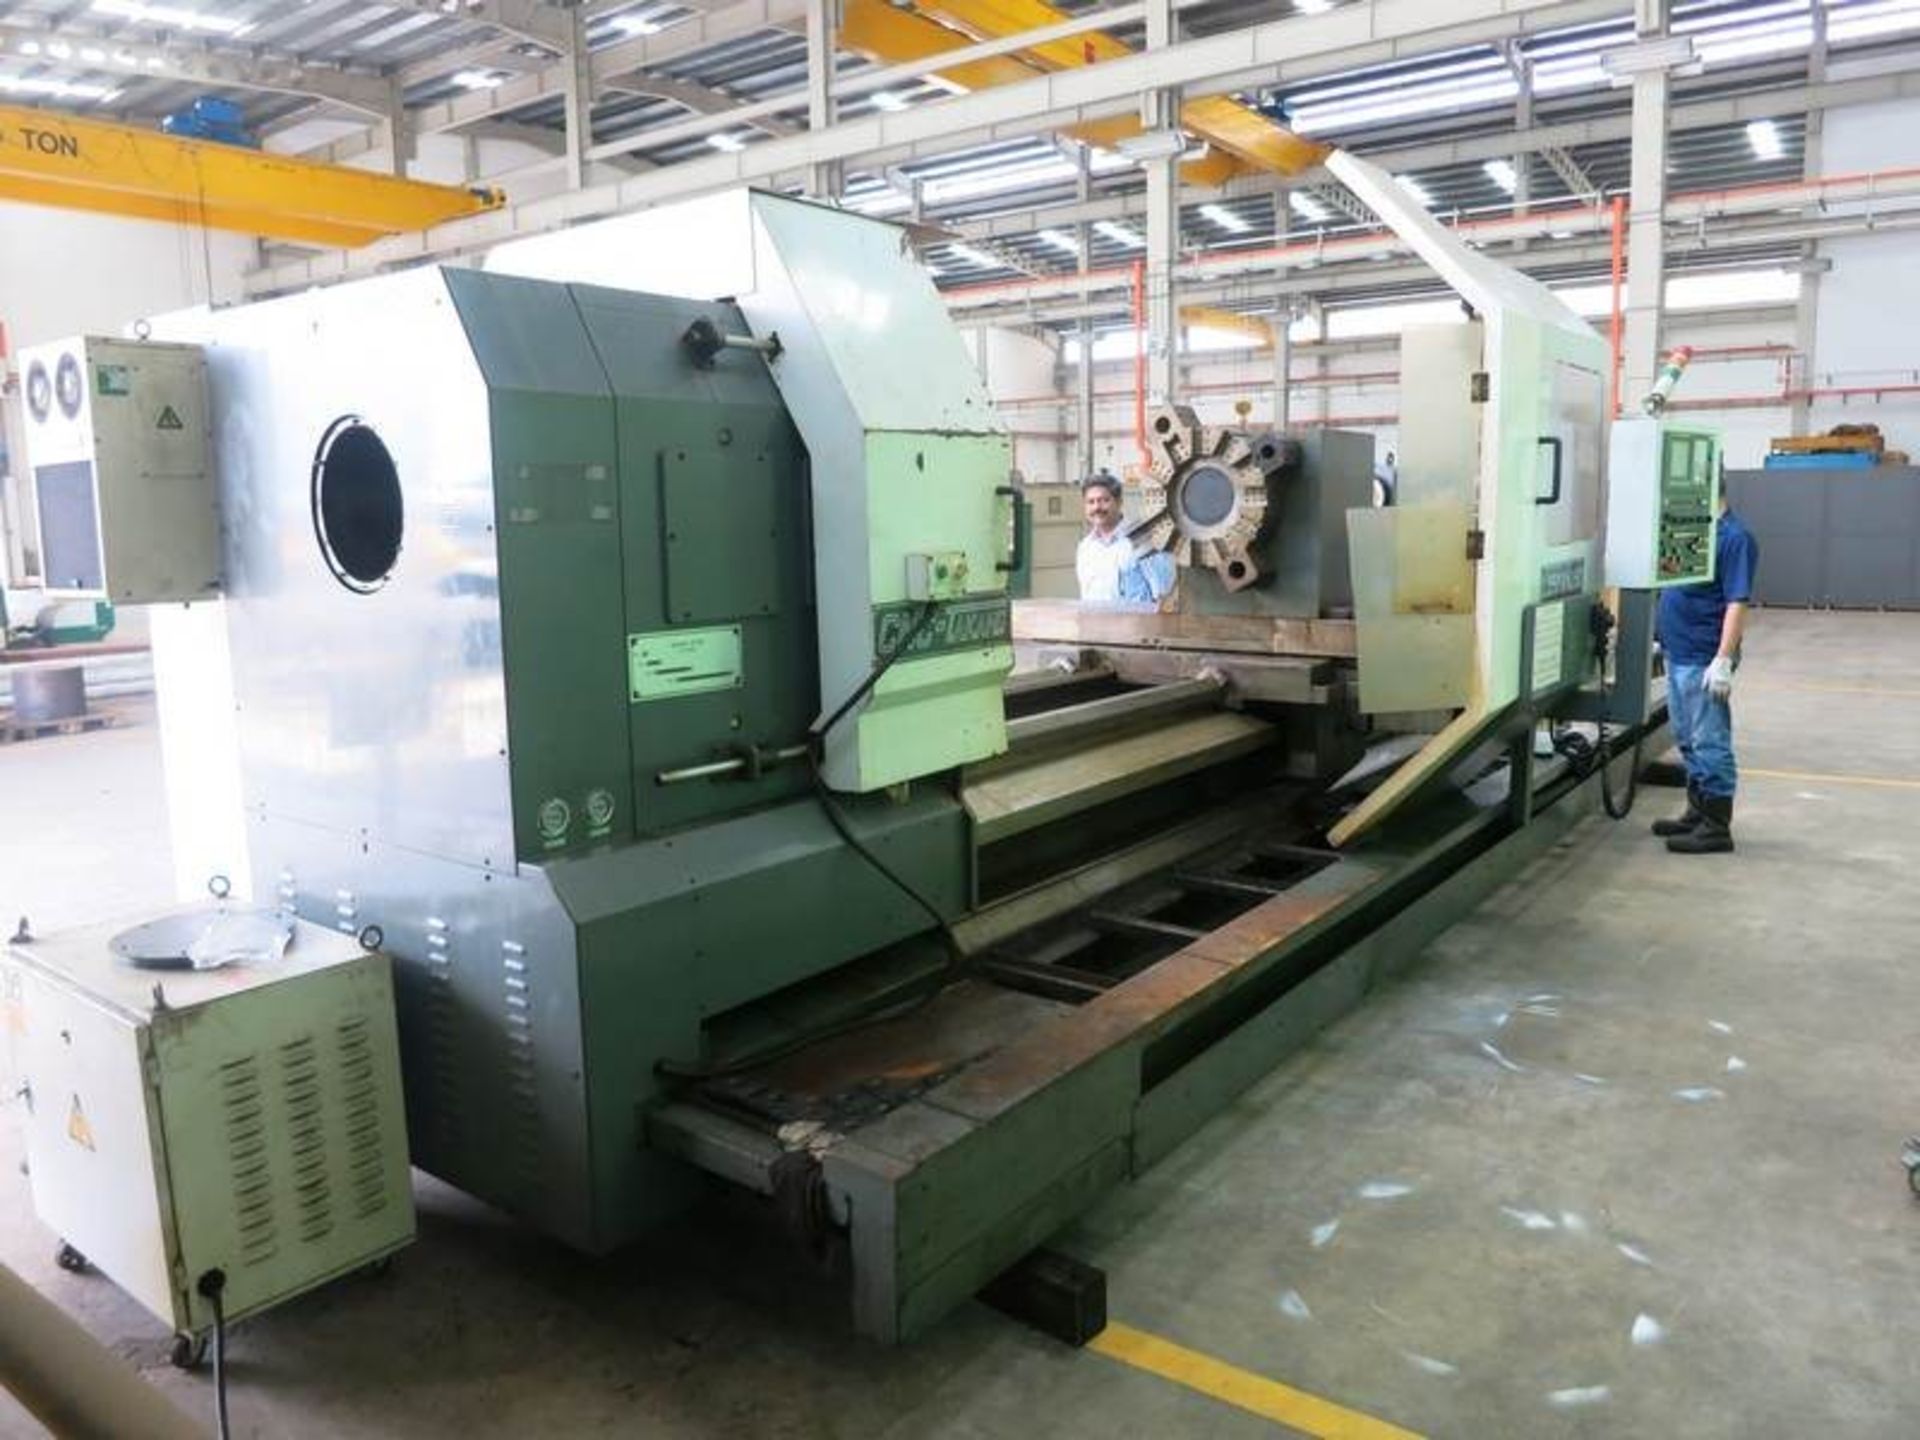 50"X163" CNC TAKANG LD50X4150 HEAVY DUTY OIL FIELD CNC LATHE WITH 12" BORE, S/N P500710007, NEW 2007